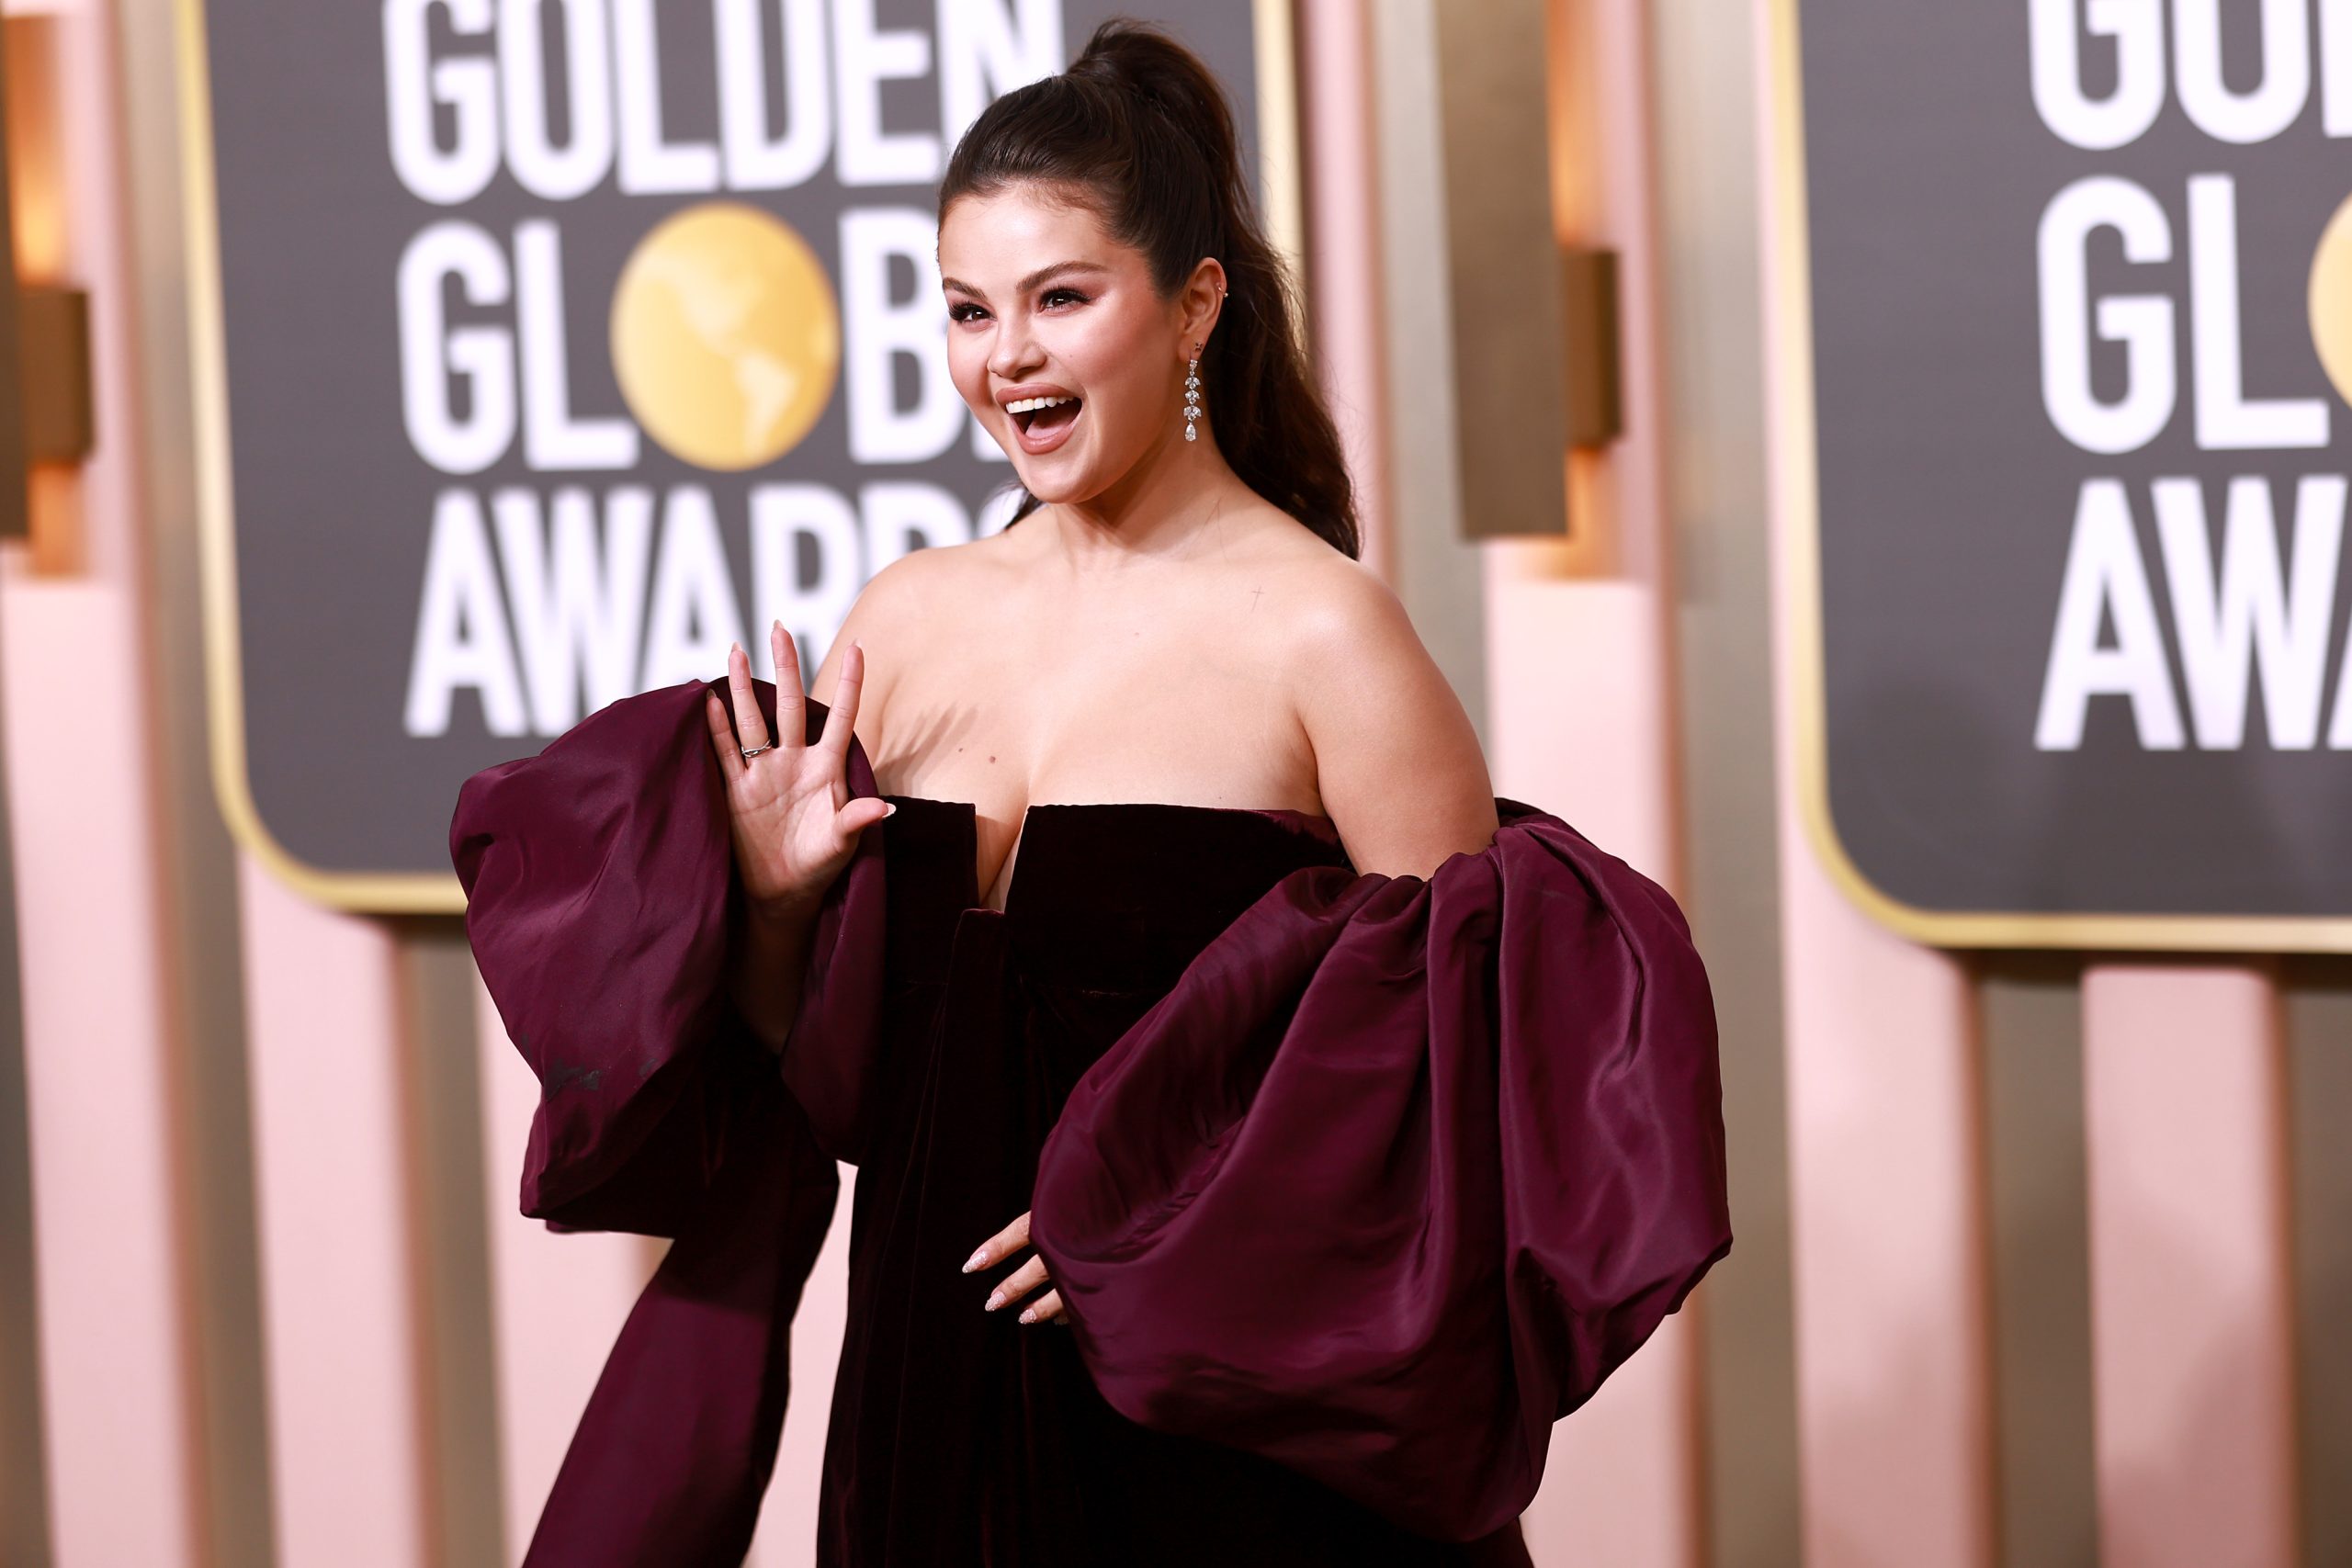 Selena Gomez Addresses Body Shaming Comments Received Following Golden Globes Appearance 2969